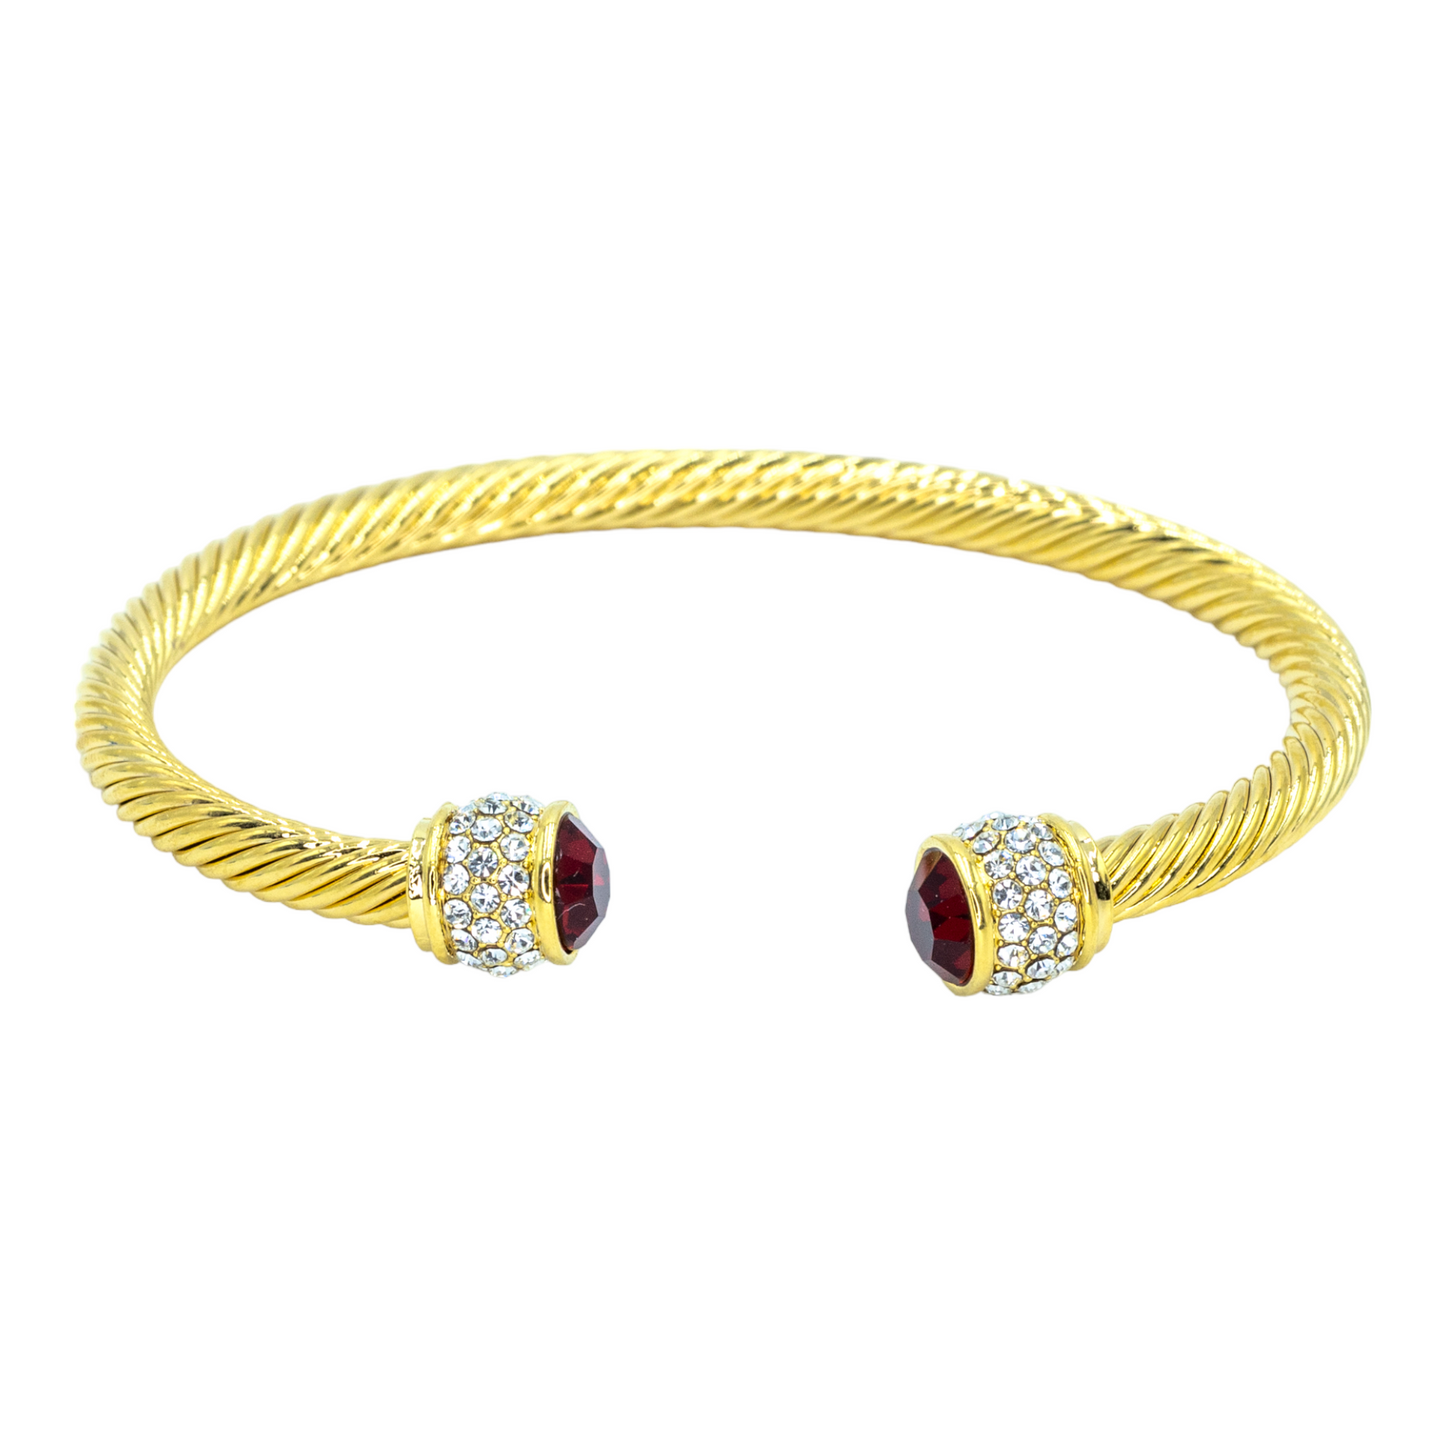 Gold plated bangle w/ CZ stones and ruby stone